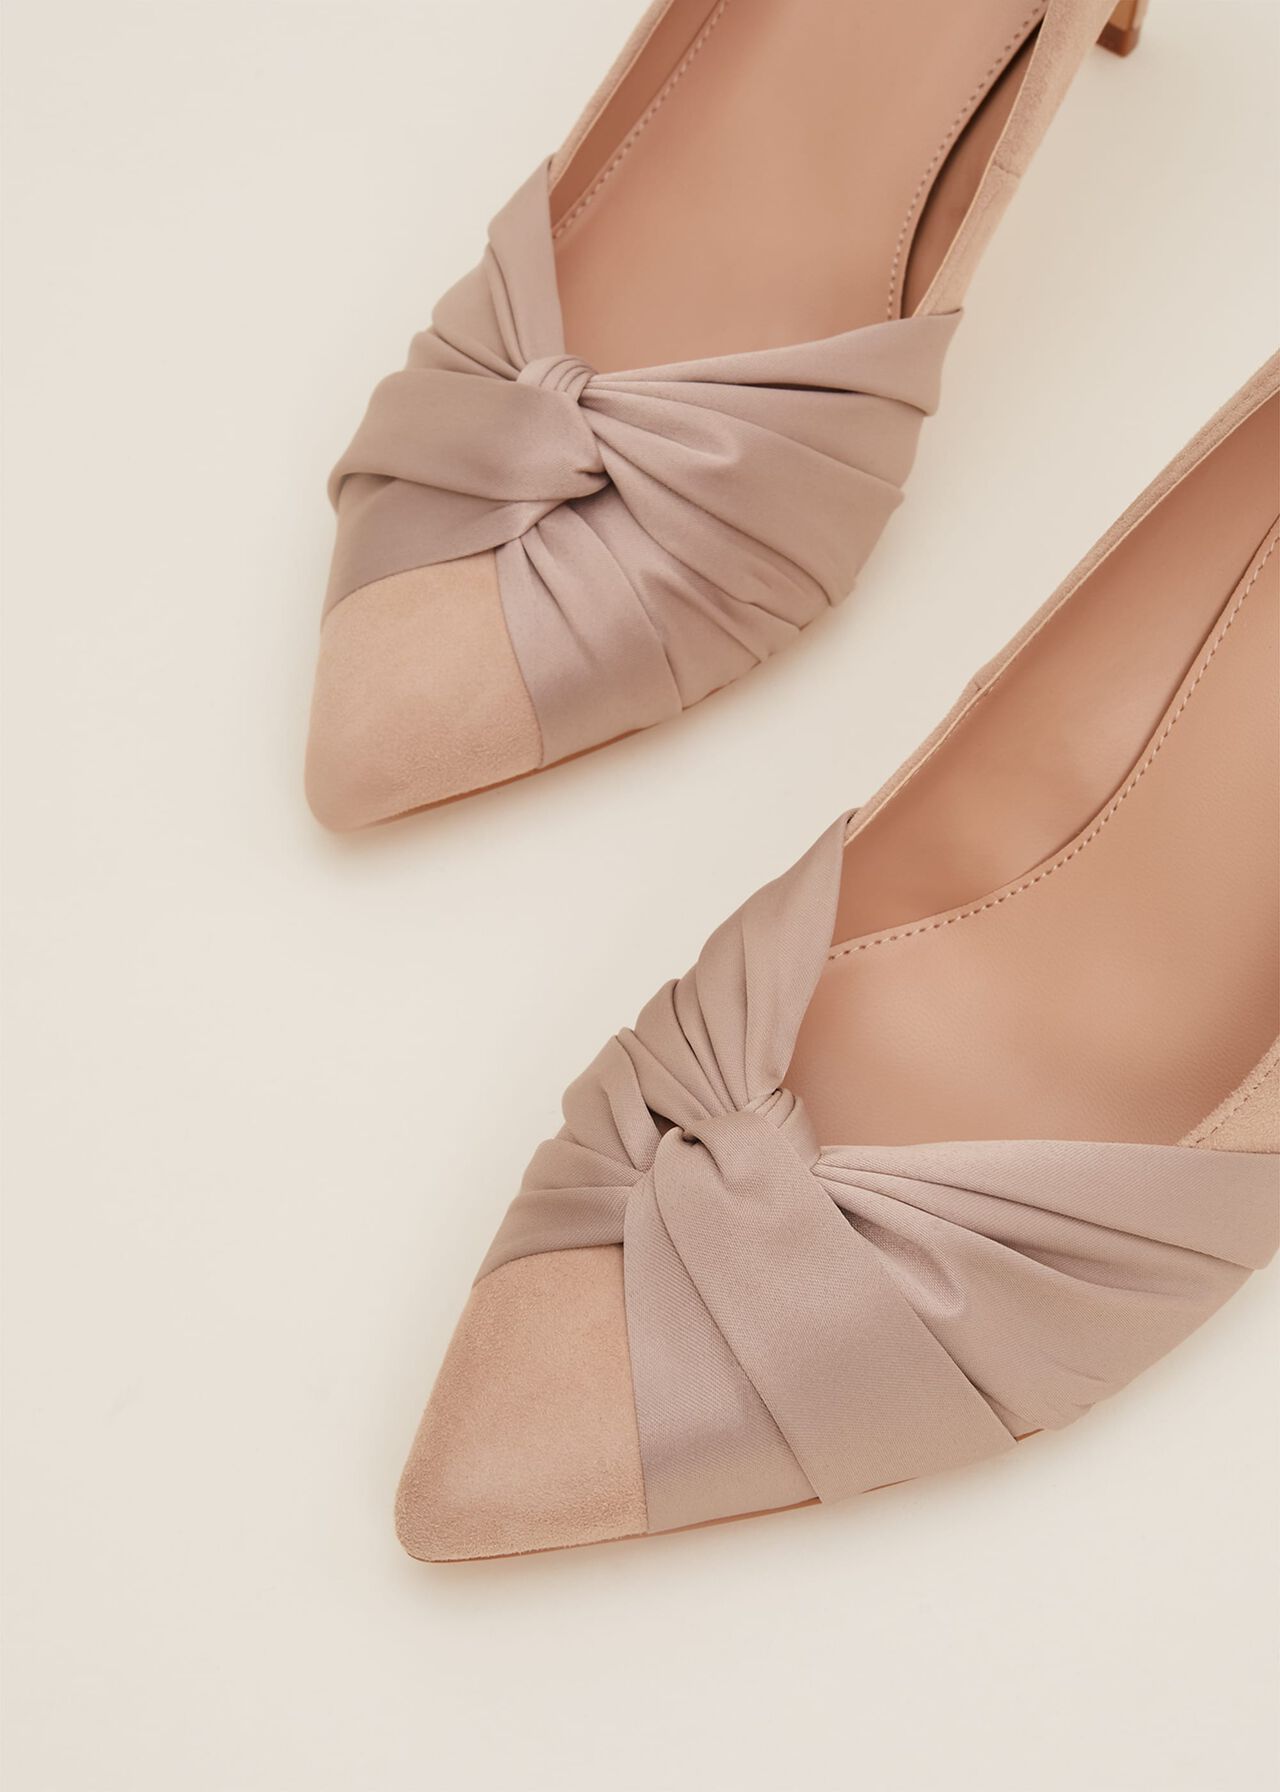 Kendal Knot Pointed Court Shoes